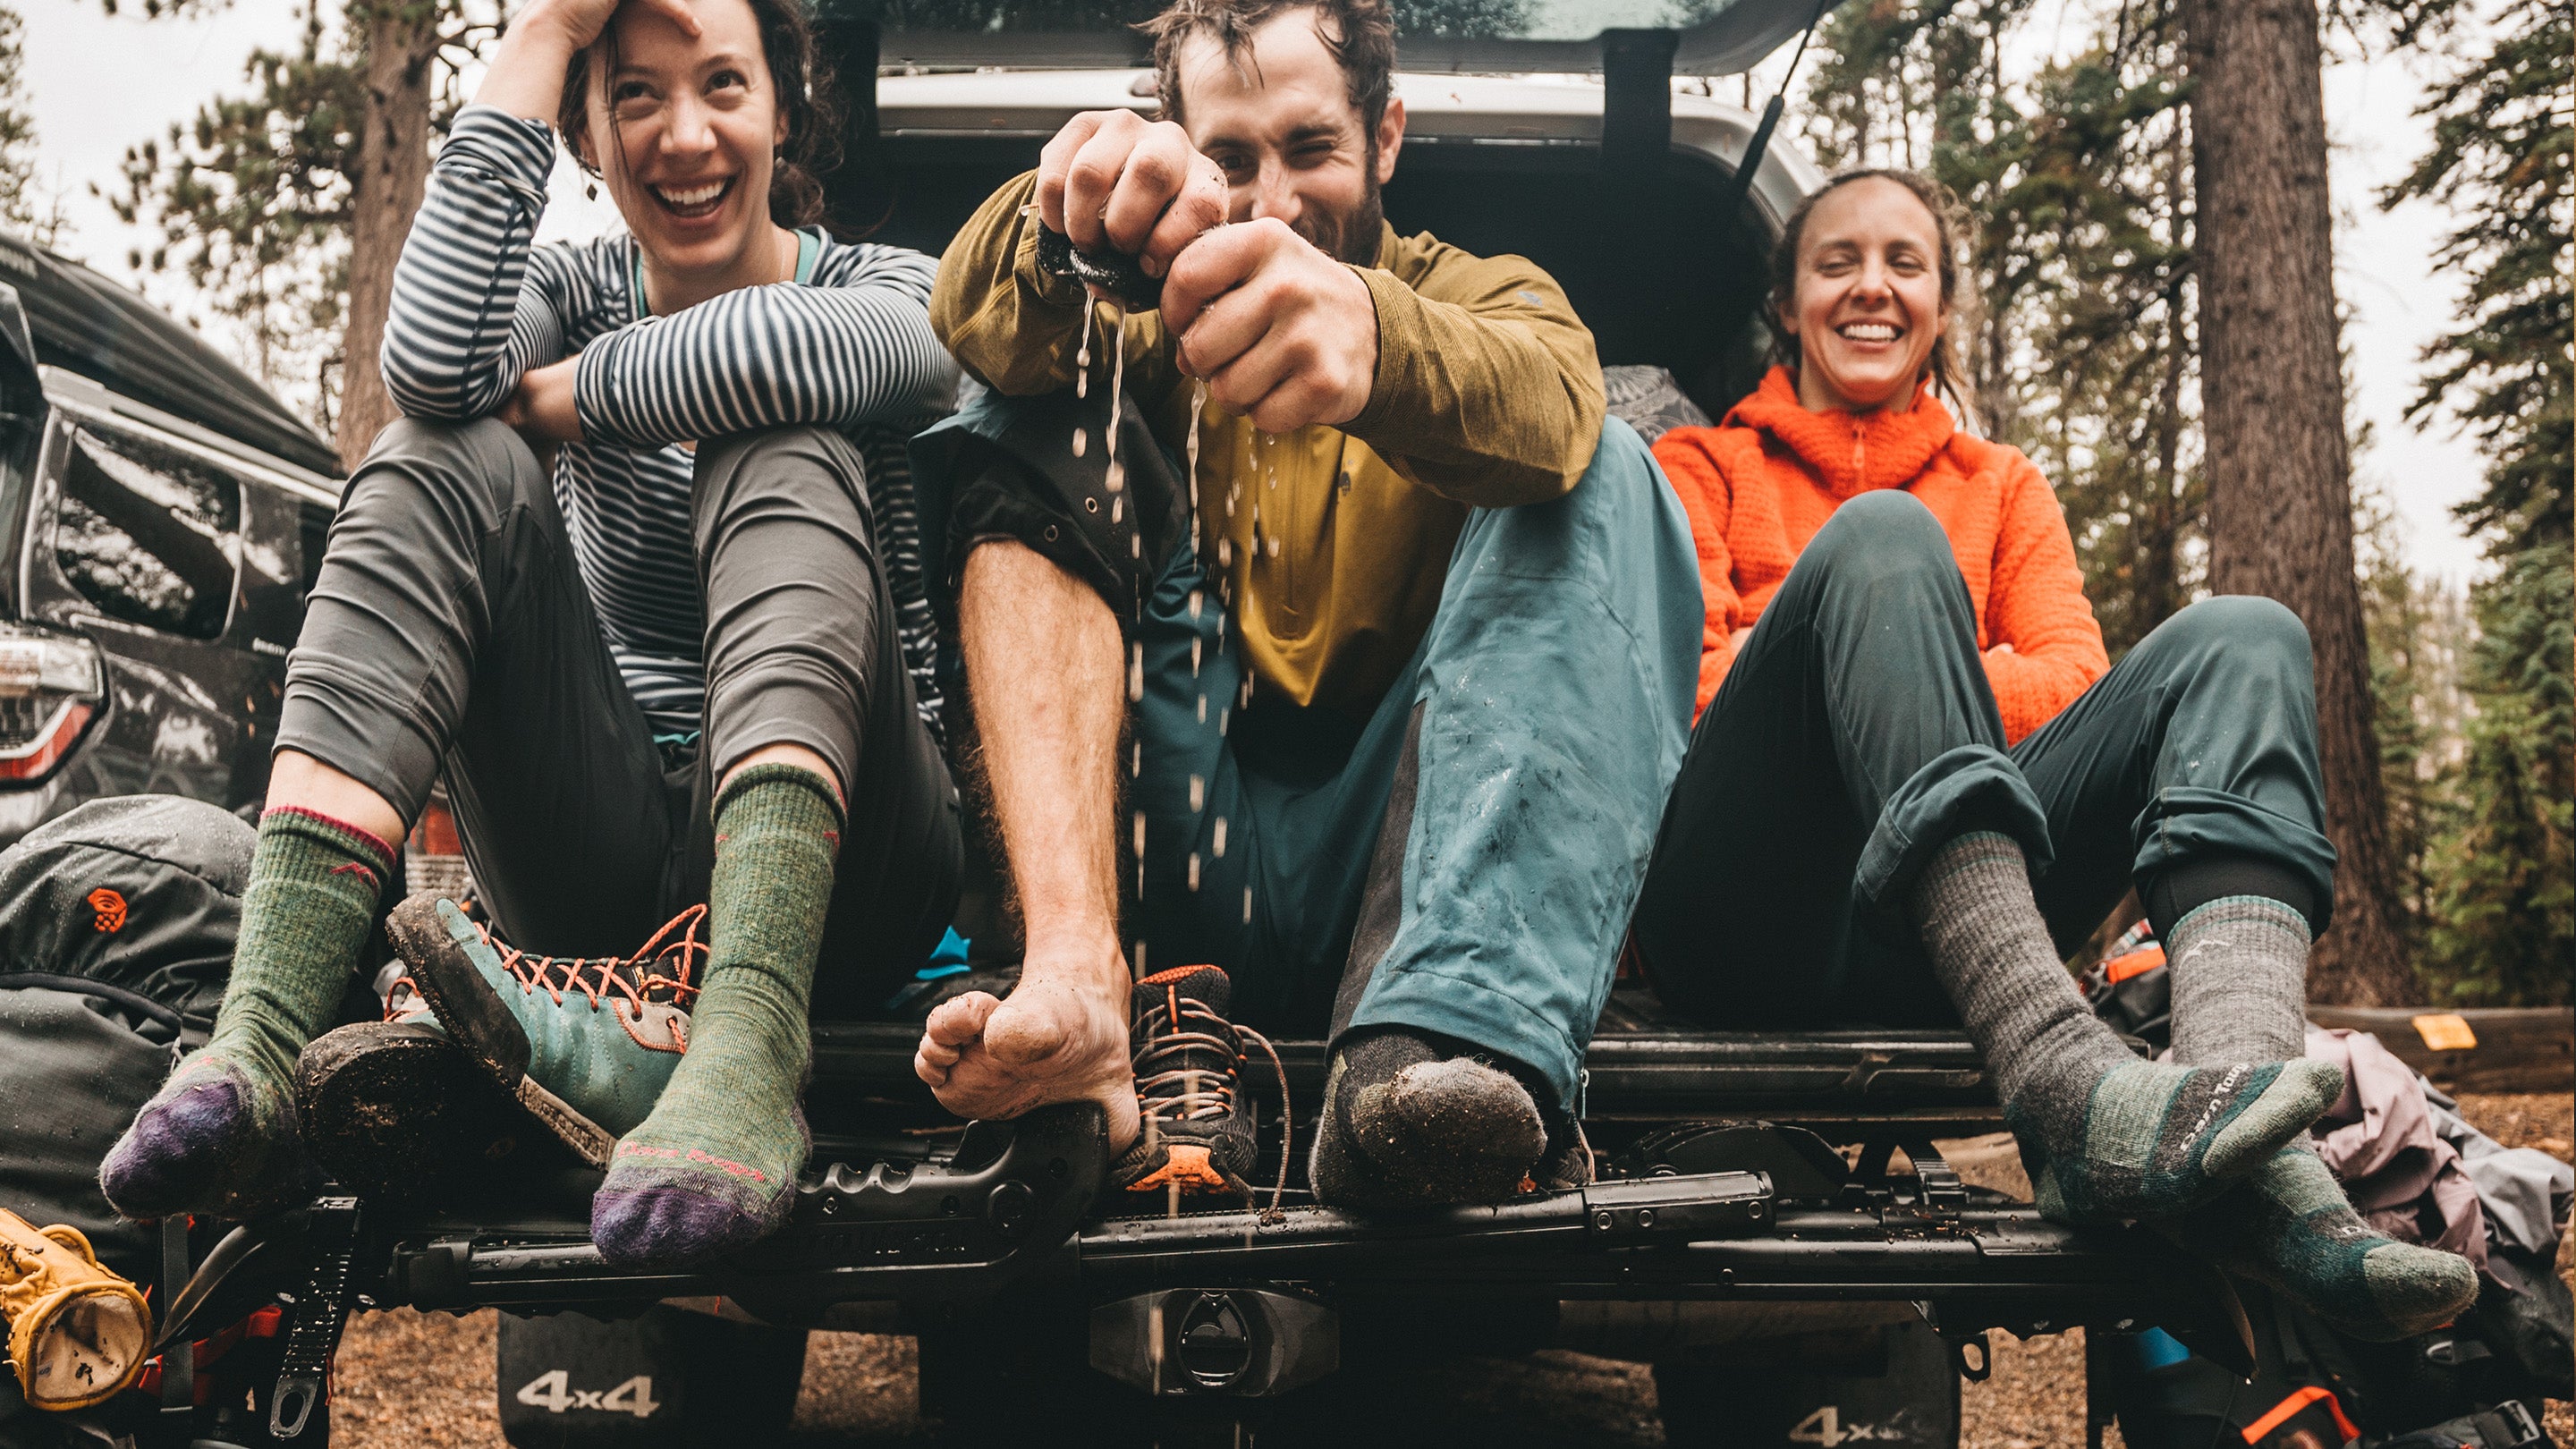 Hiking Socks for Backpacking & Day Trips